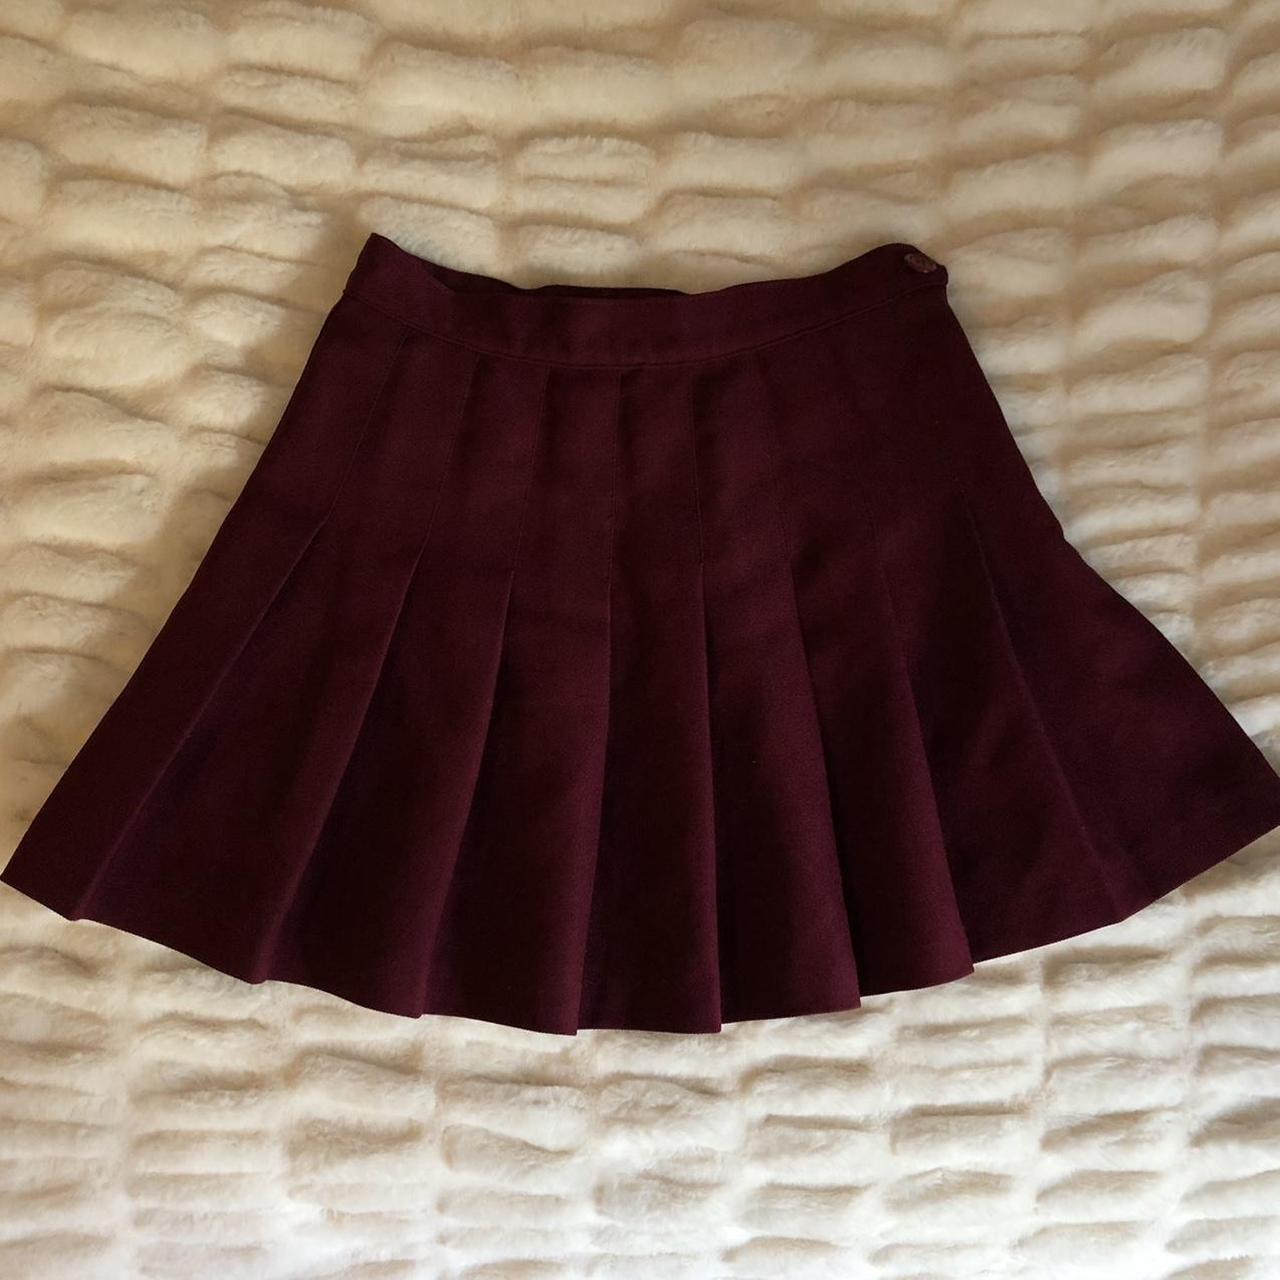 American Apparel Women's Burgundy and Red Skirt